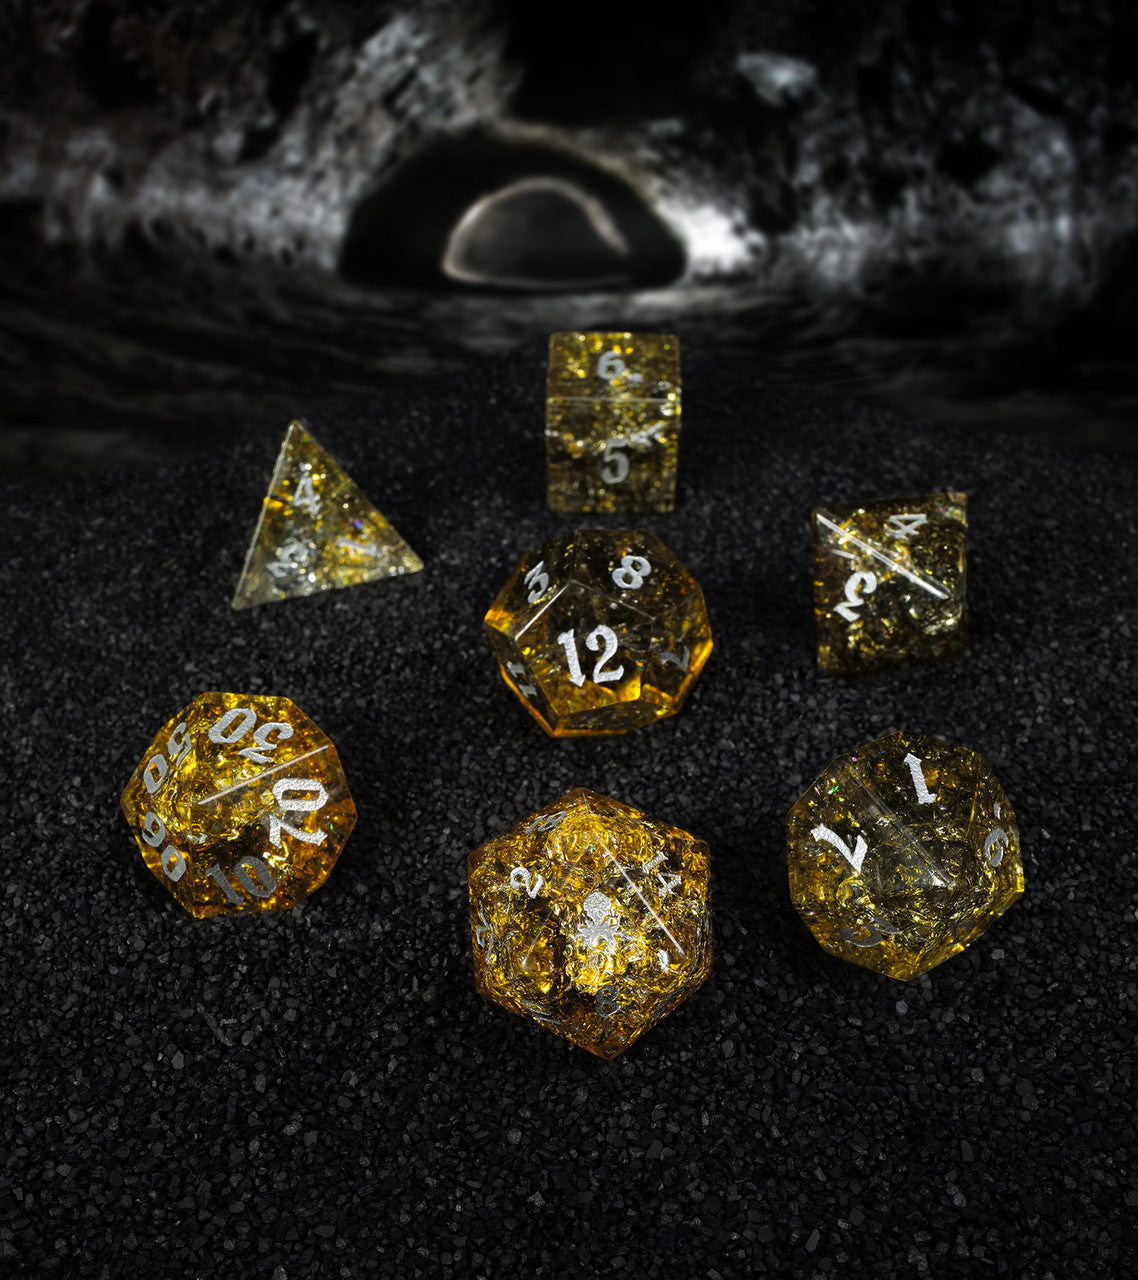 Fragments of Daylight Comet Cracked Glass 7PC Glass Dice Set